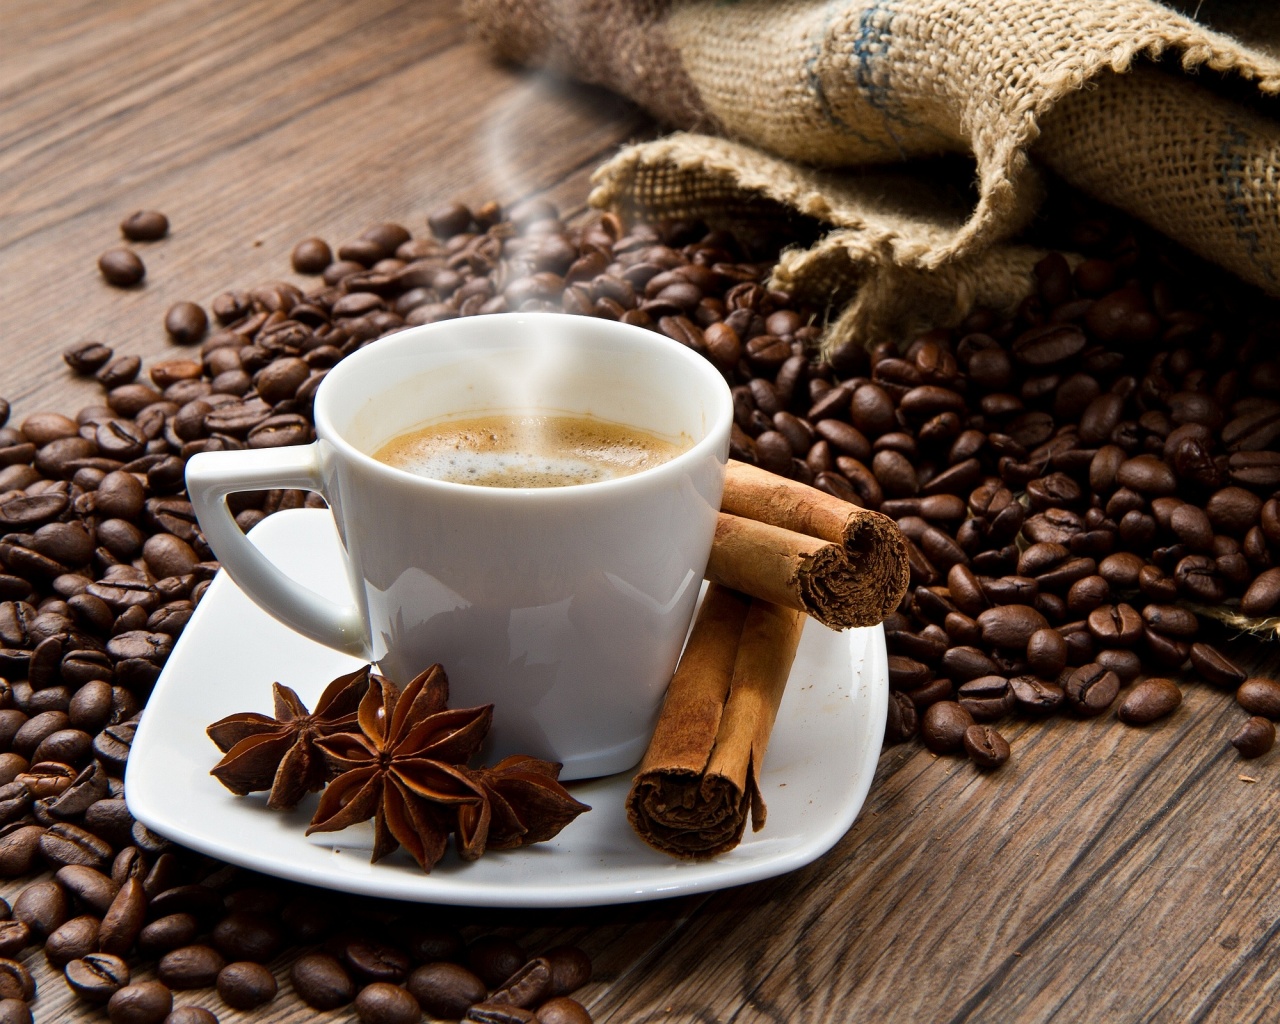 Cut the Risk of Colon Cancer by 50% : A 12 year study on Japanese women found that drinking 3 or more cups of coffee per day may actually halve the risk ...